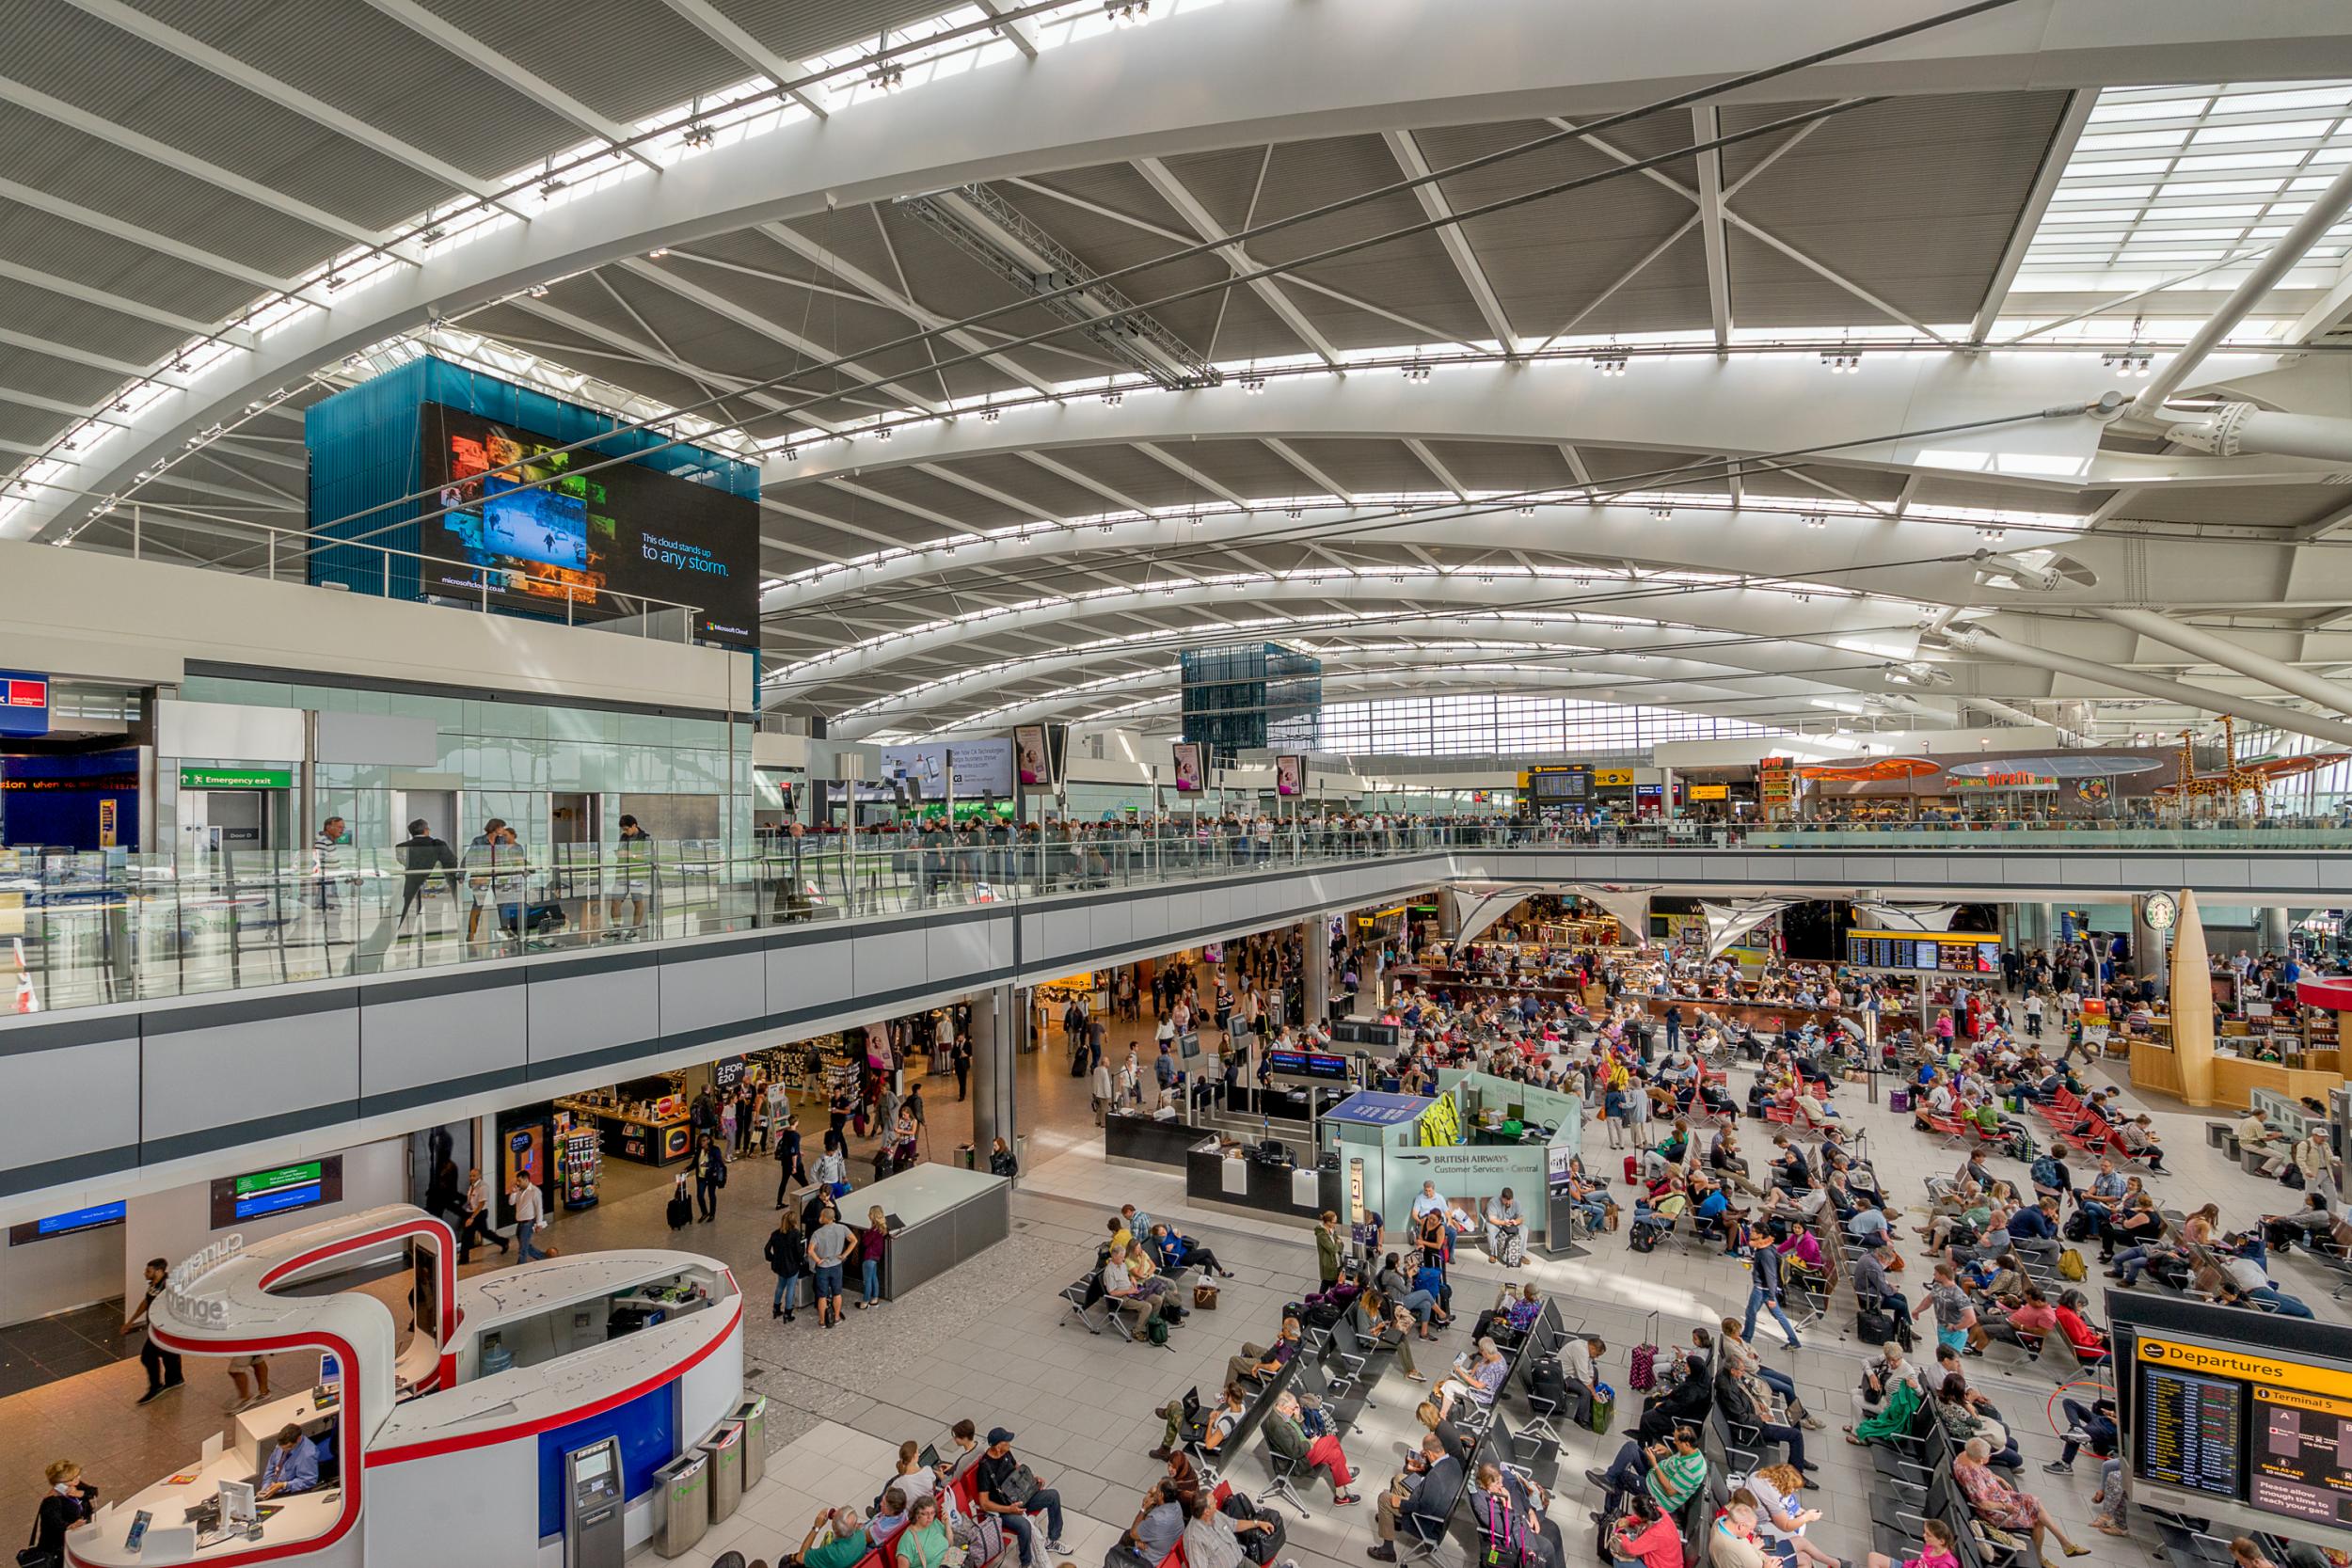 Heathrow will be busy this Easter weekend